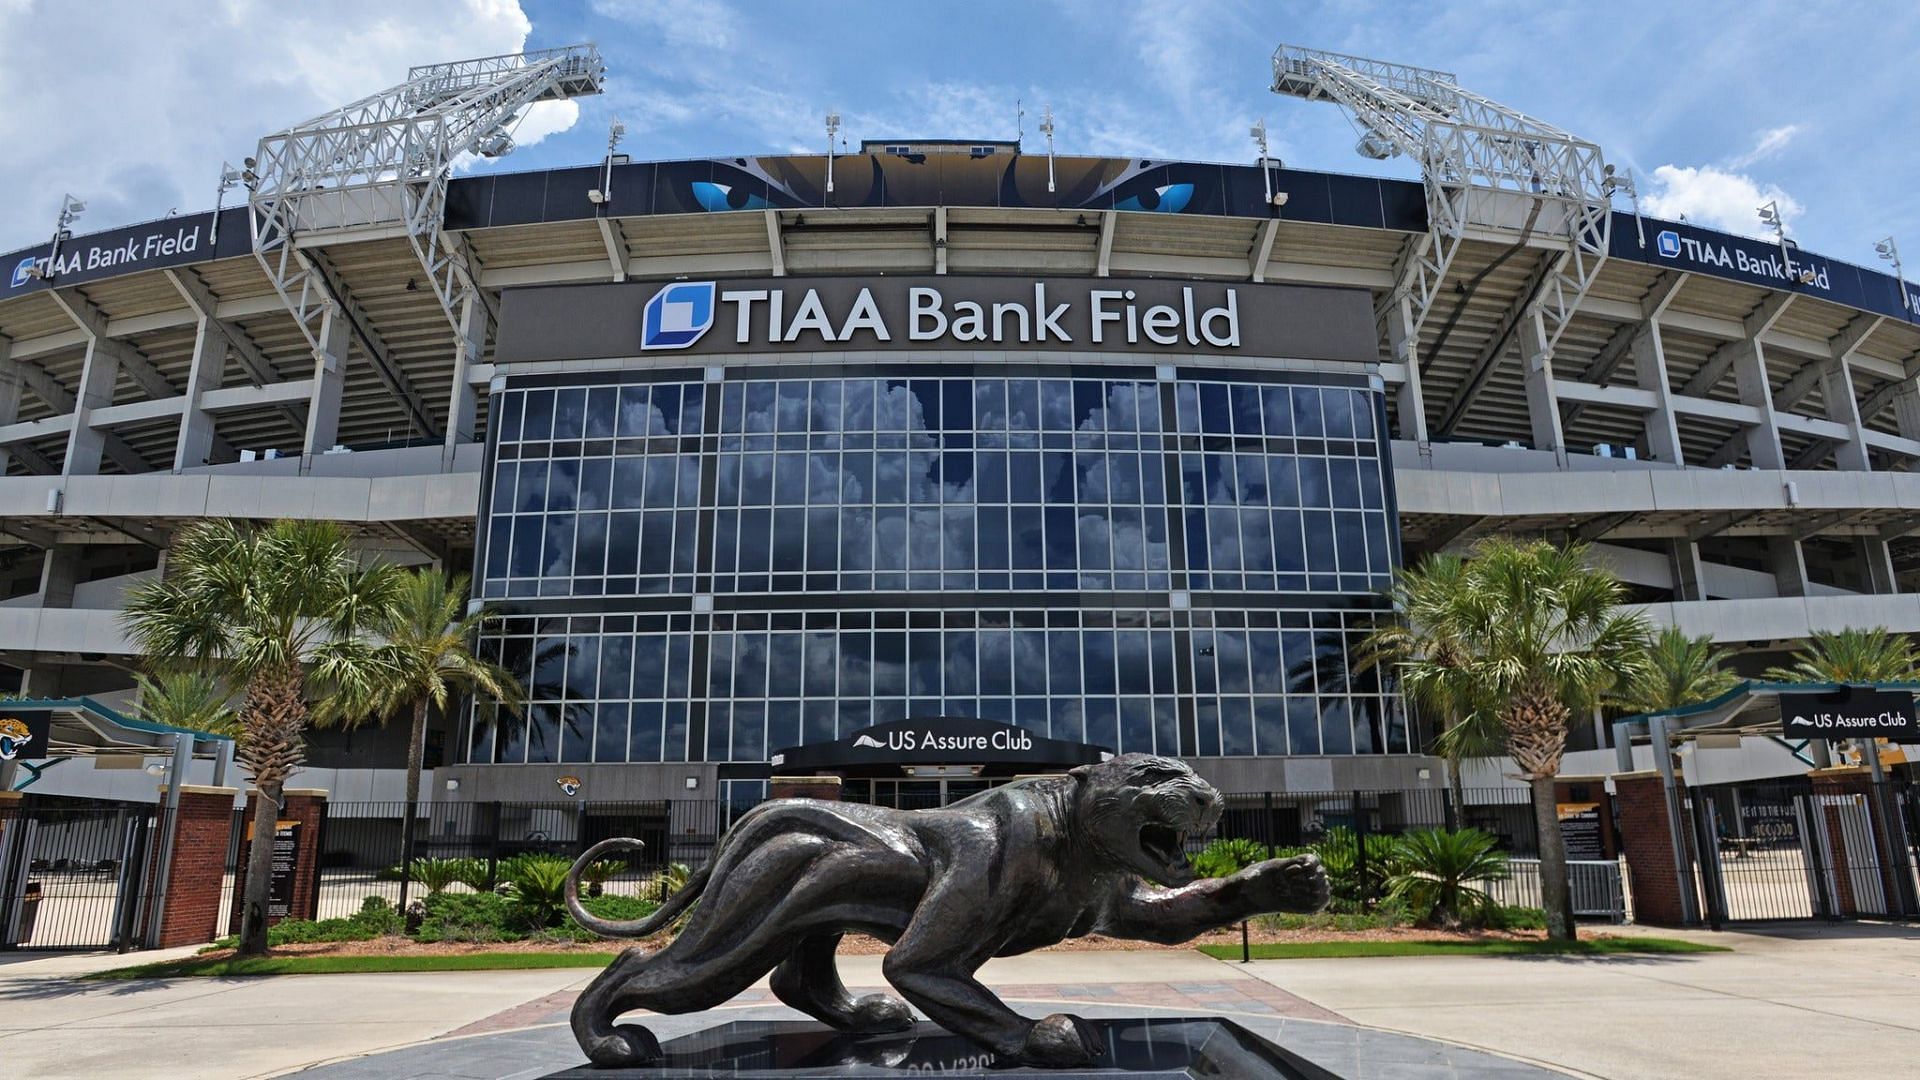 TIAA Bank Stadium, home of the Jacksonville Jaguars was recently side for numerous health code violations.